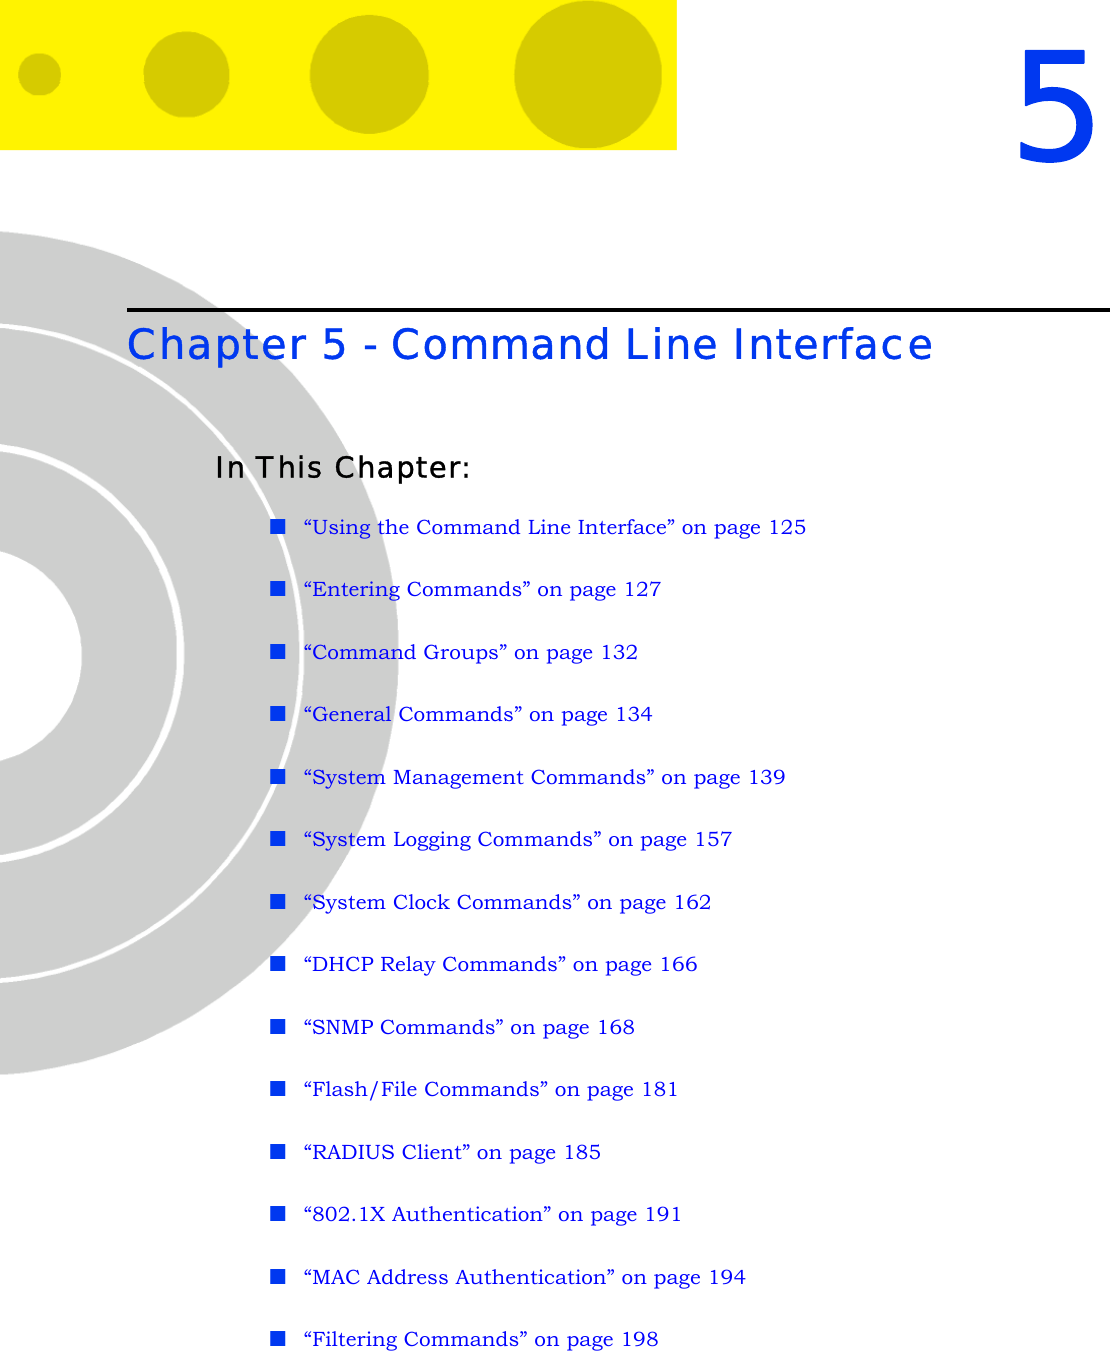 5Chapter 5 - Command Line InterfaceIn This Chapter:“Using the Command Line Interface” on page 125“Entering Commands” on page 127“Command Groups” on page 132“General Commands” on page 134“System Management Commands” on page 139“System Logging Commands” on page 157“System Clock Commands” on page 162“DHCP Relay Commands” on page 166“SNMP Commands” on page 168“Flash/File Commands” on page 181“RADIUS Client” on page 185“802.1X Authentication” on page 191“MAC Address Authentication” on page 194“Filtering Commands” on page 198